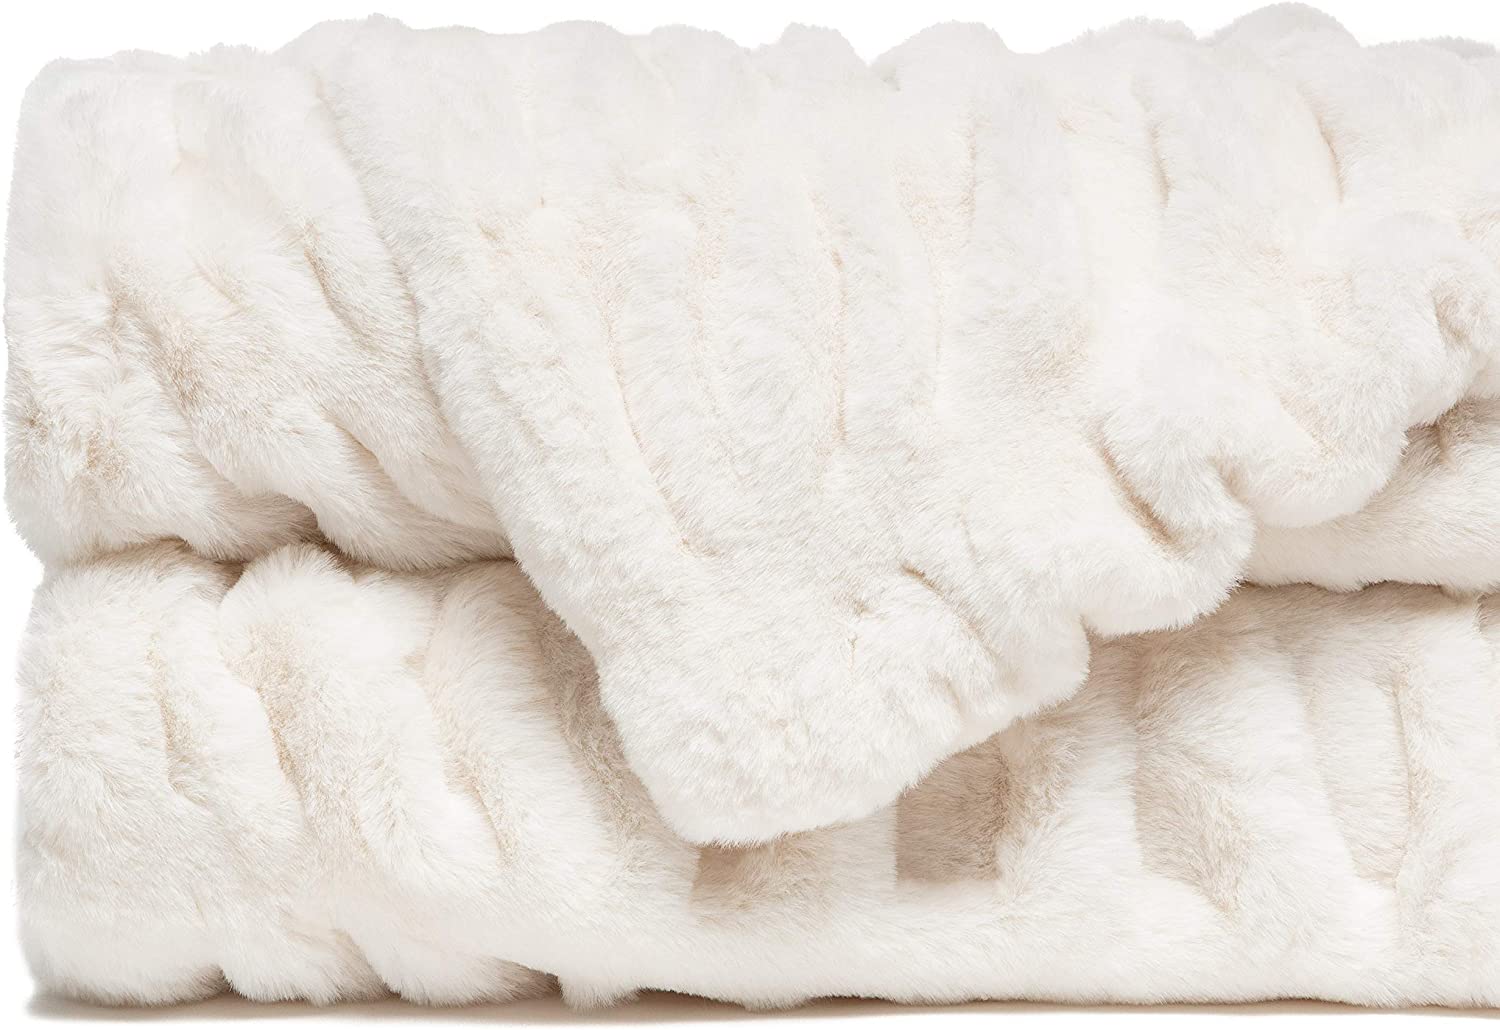 Testing 17 of The Softest Plush Blankets (Perfect for Snuggling)